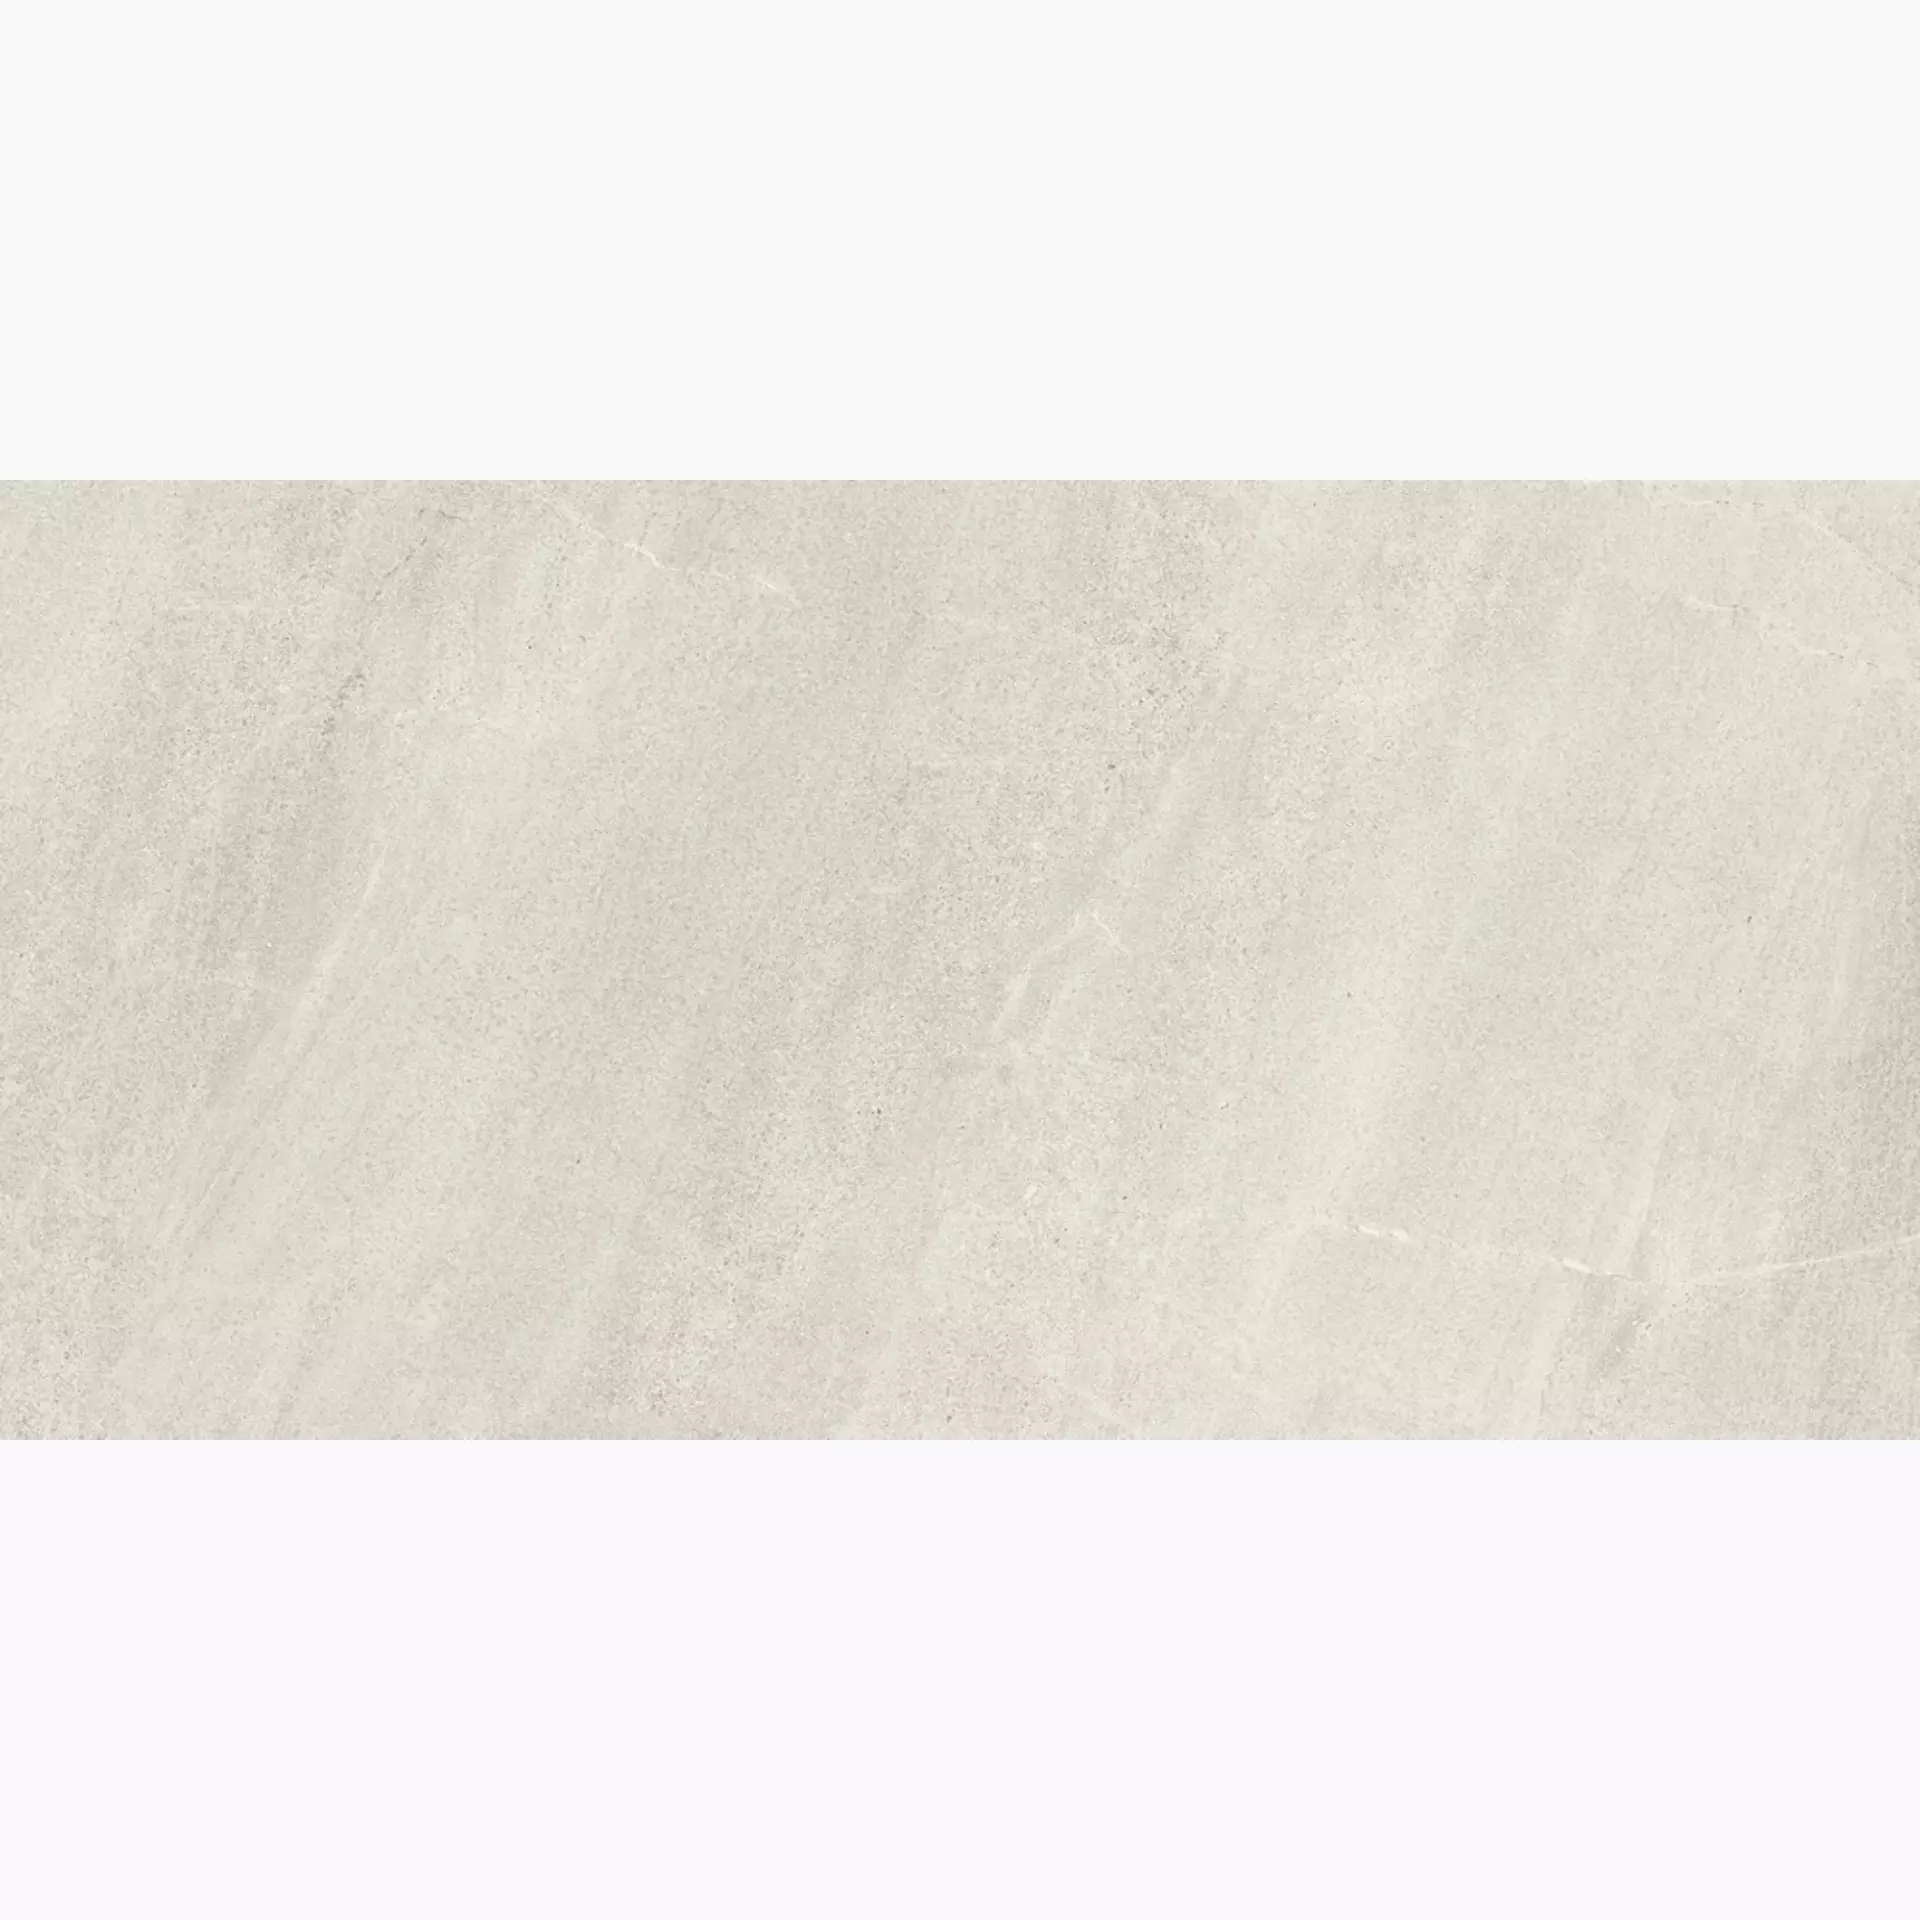 Cottodeste Limestone Clay Honed Protect EGXLSH1 60x120cm rectified 14mm